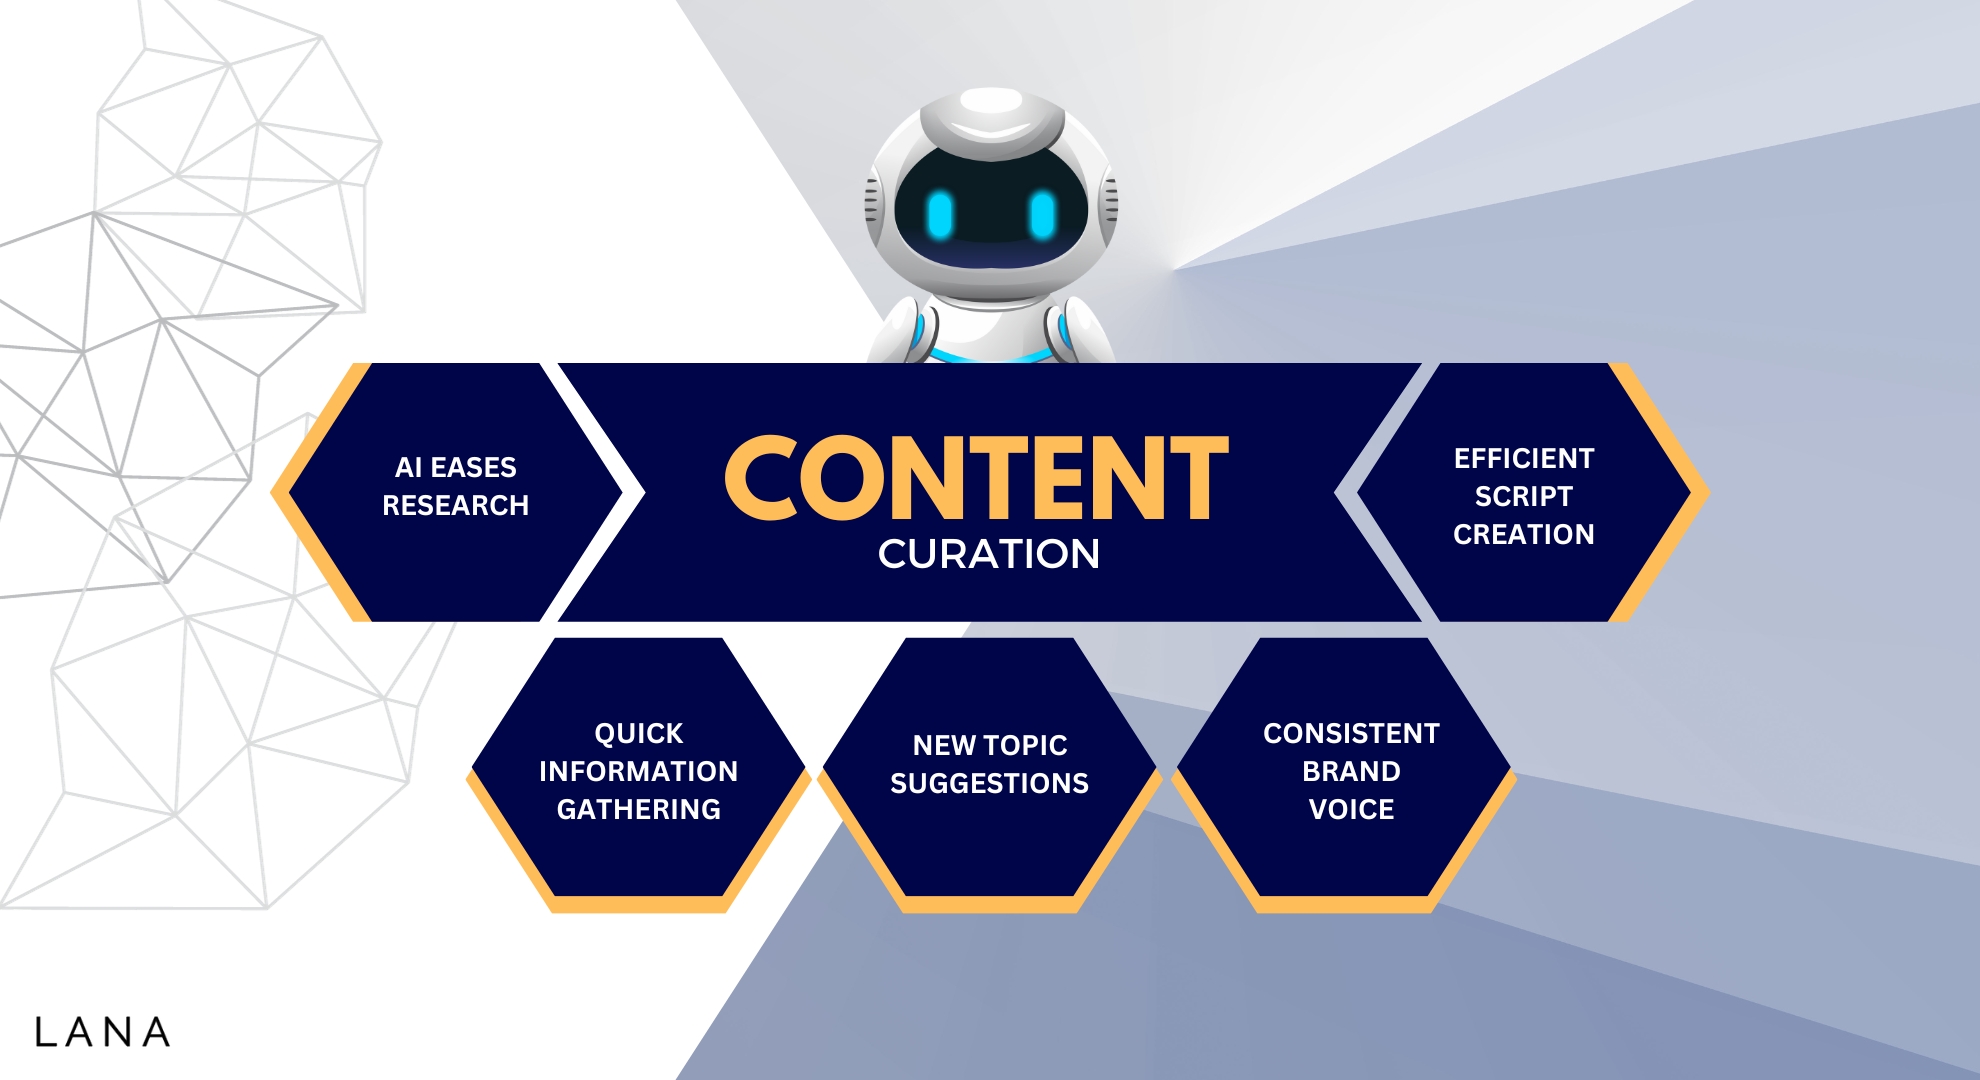 Content Curation and Creation